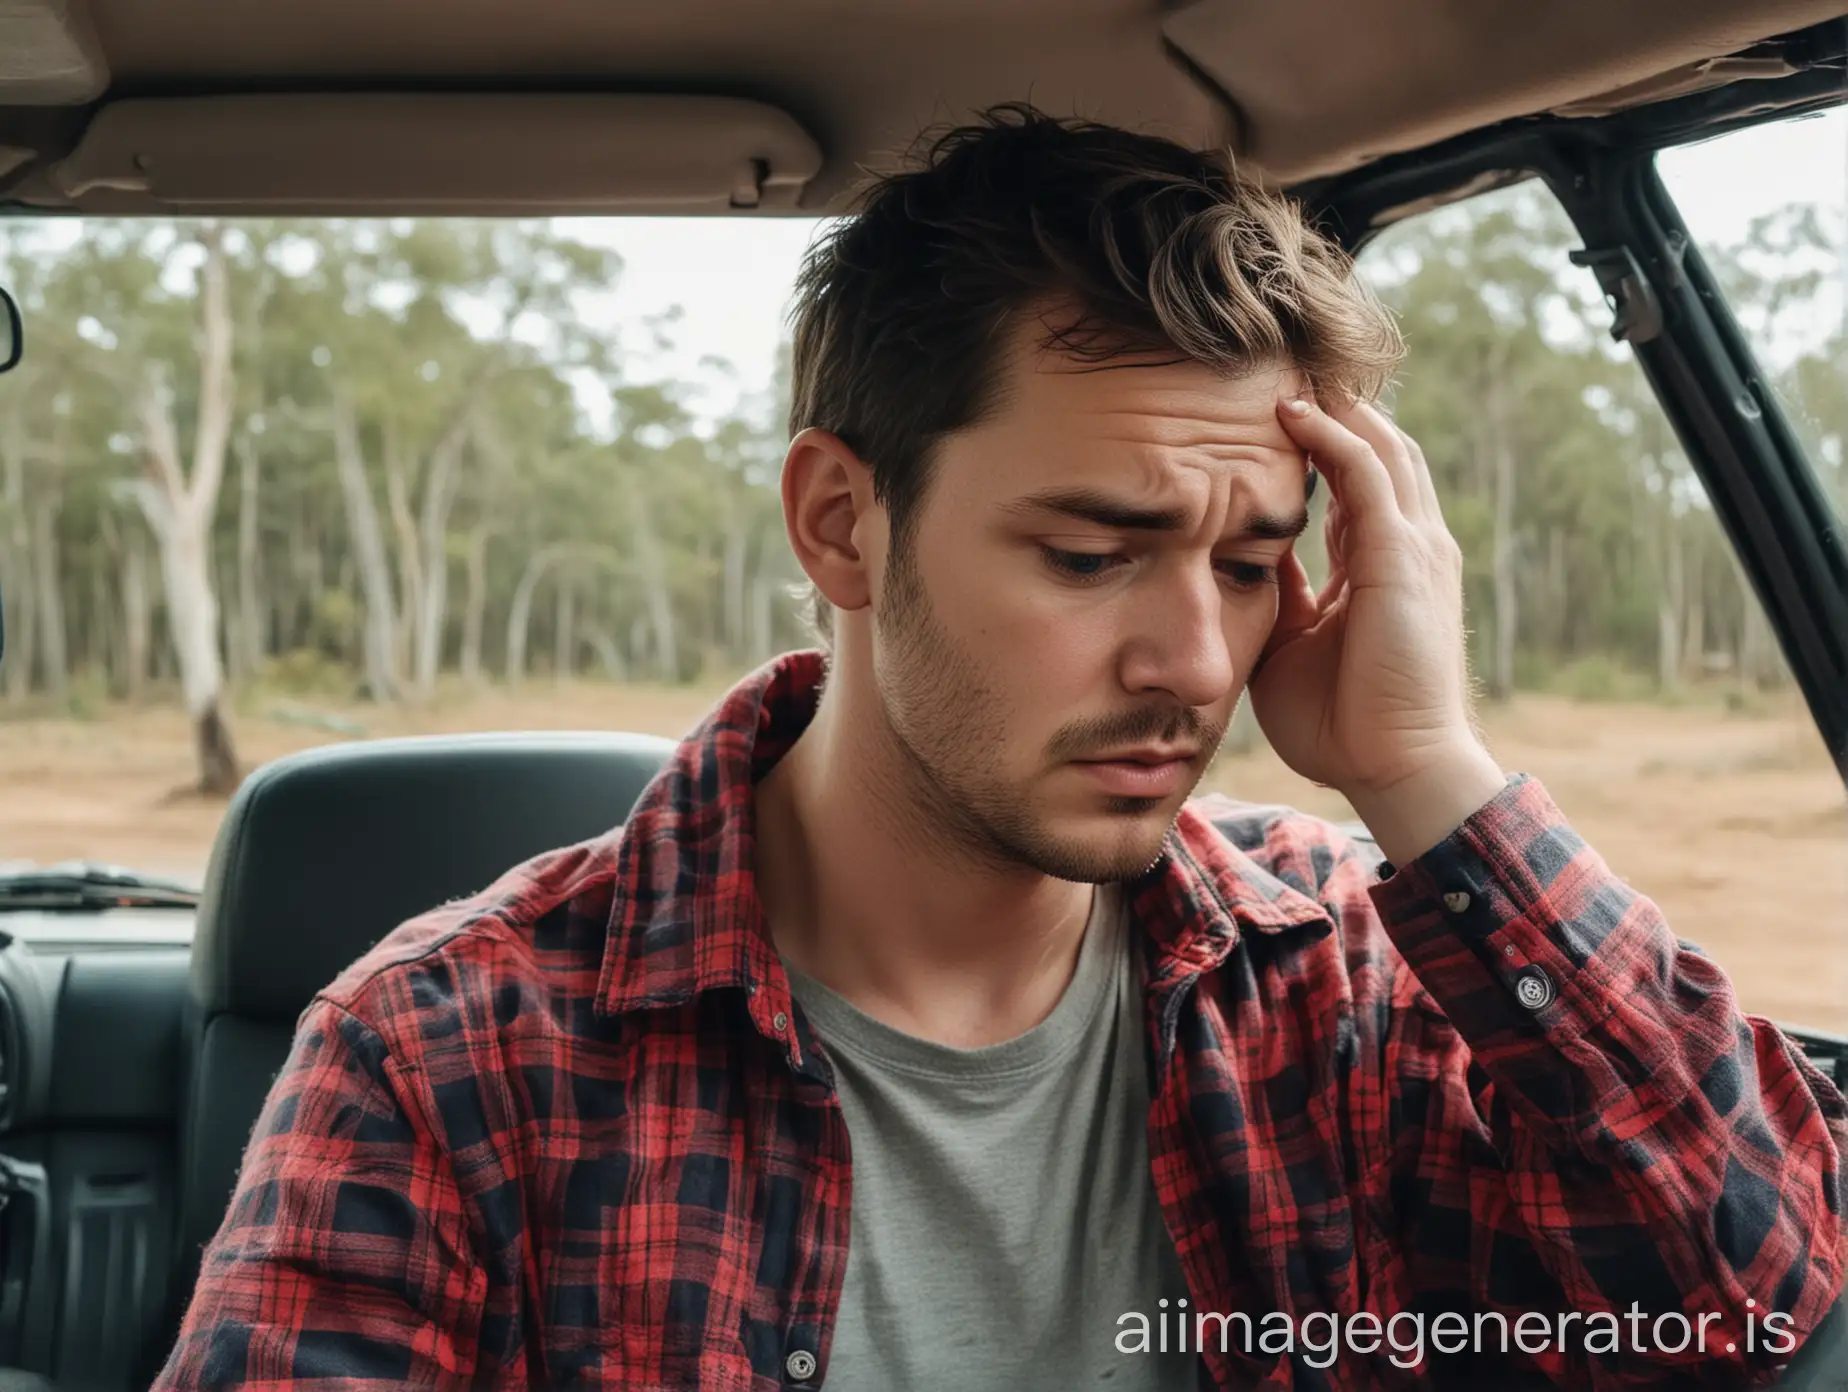 panoramic photo of a sad problematic Australian plumber holding his forehead, sitting in the front seat of a Ford Ranger, looking down, wearing a flannel top, clean cut hair